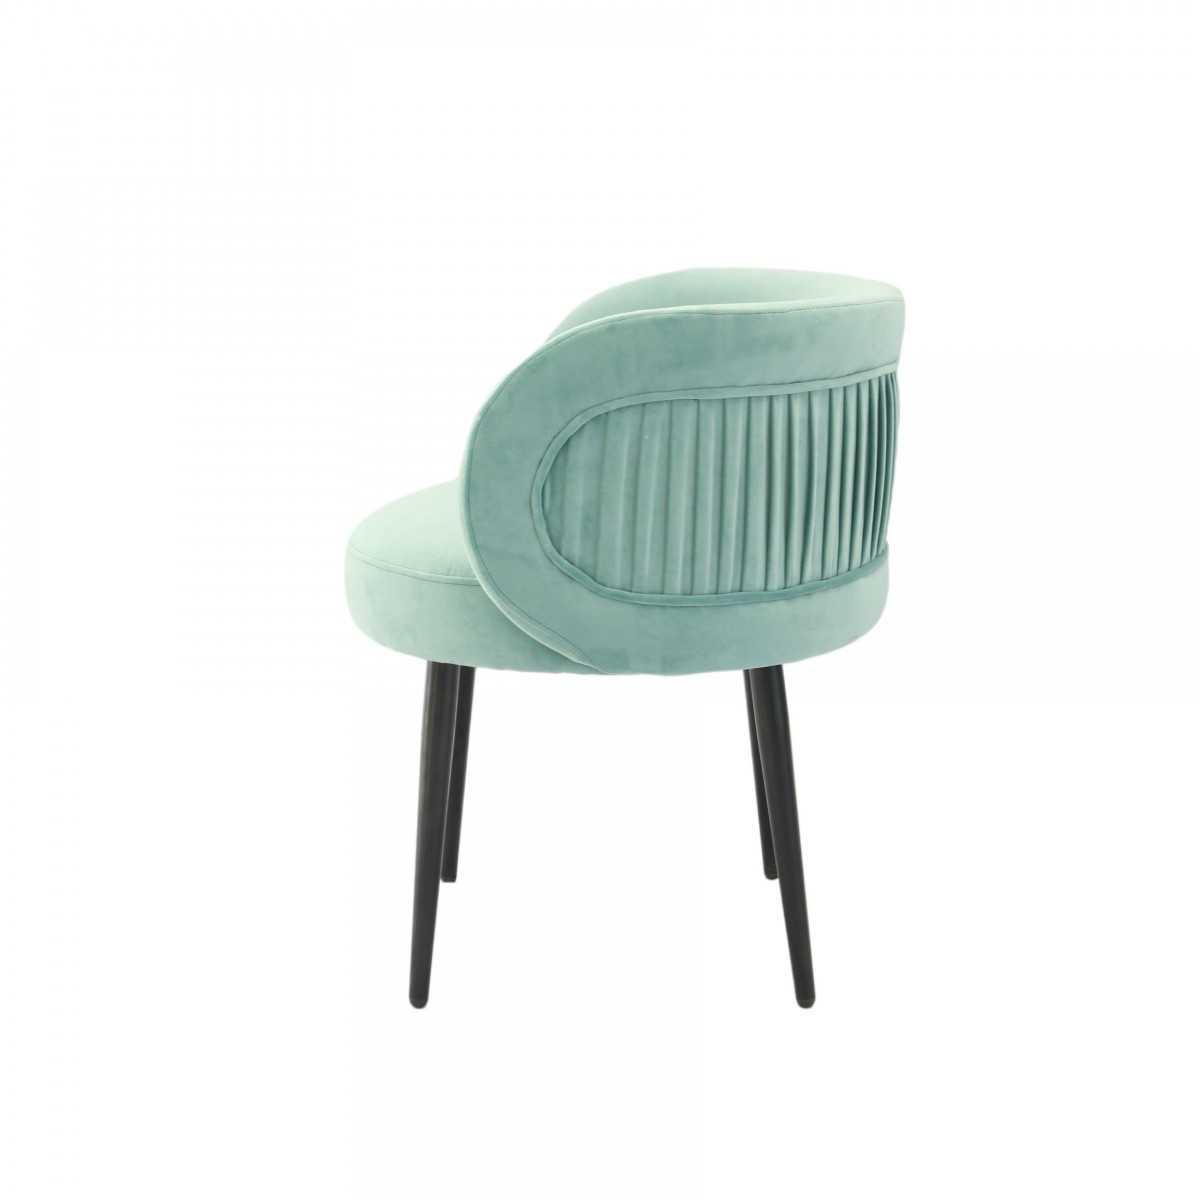 "24"" Teal Velvet And Black Solid Color Arm Chair"